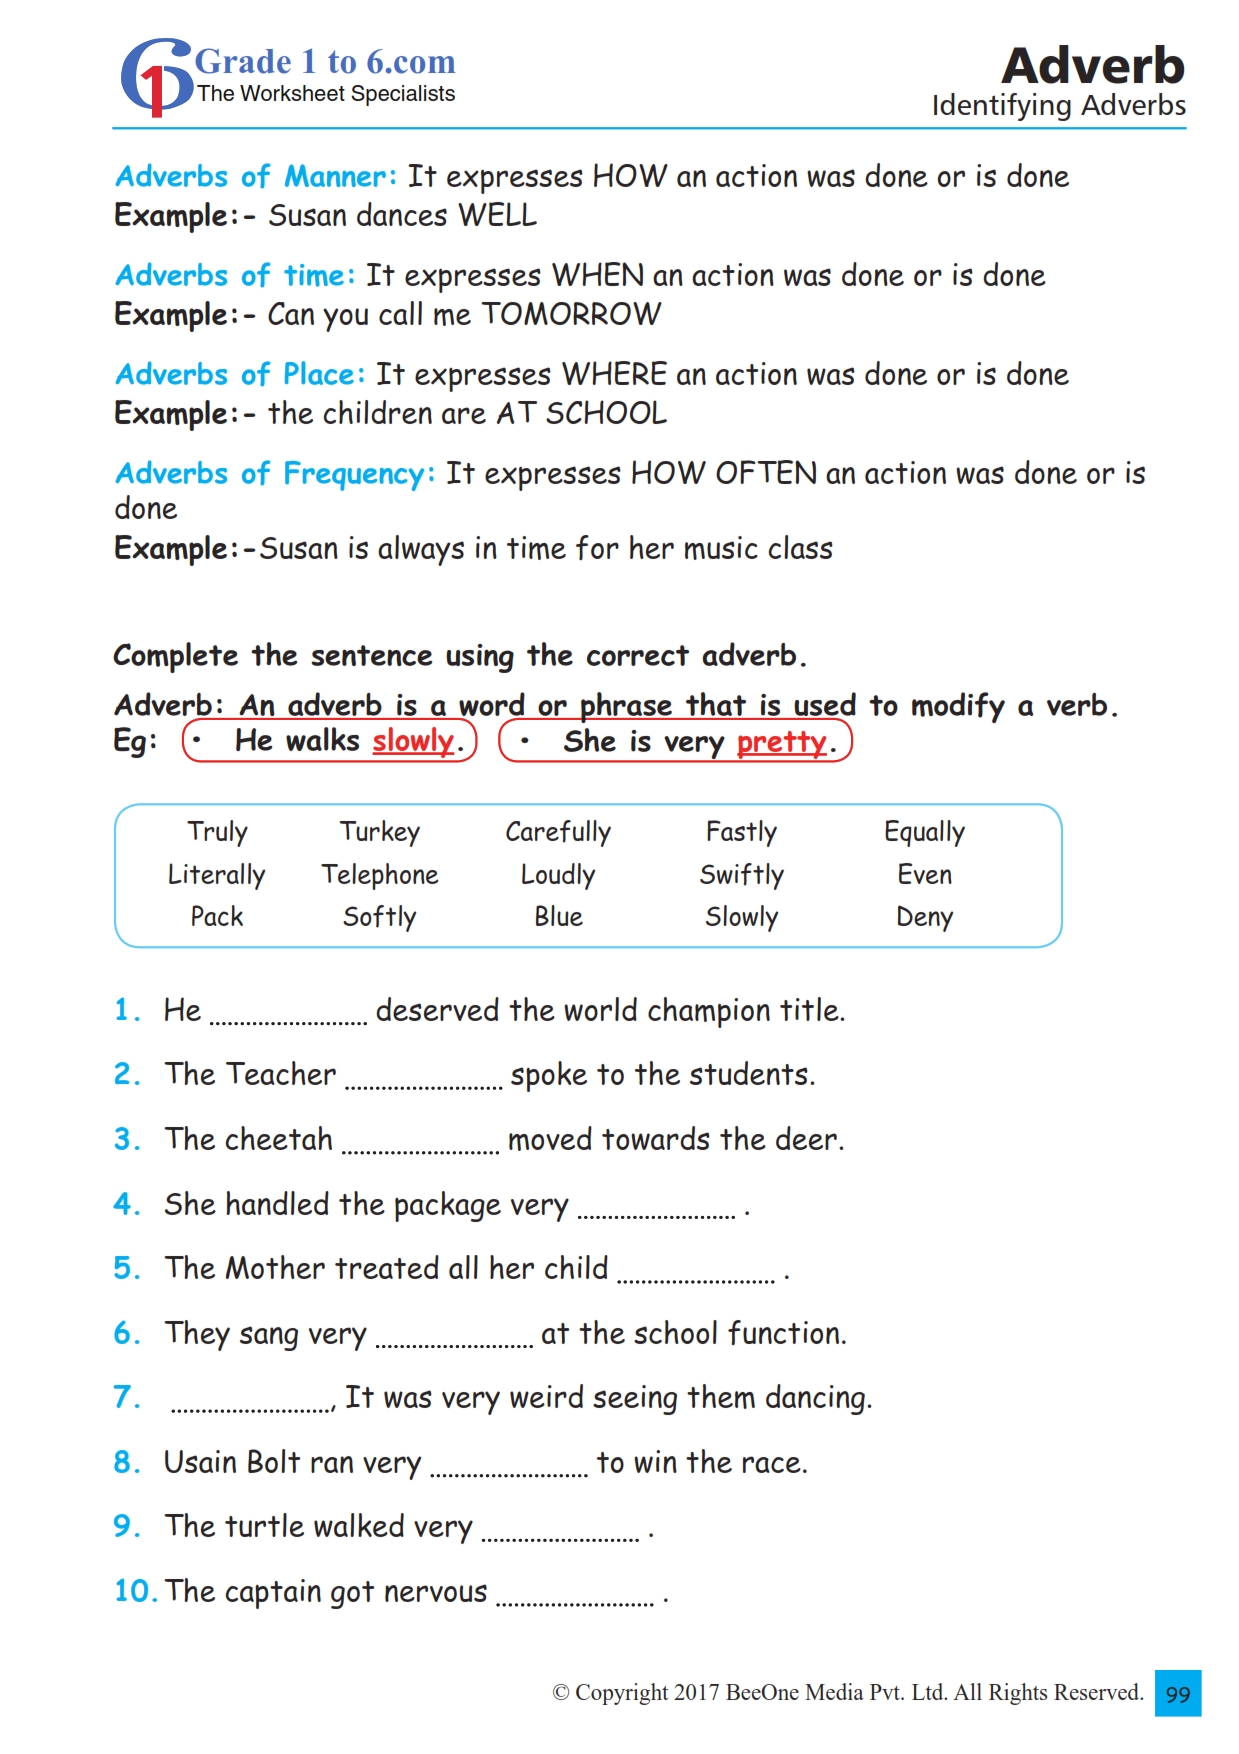 Adverbs Identifying Worksheet For Class 6